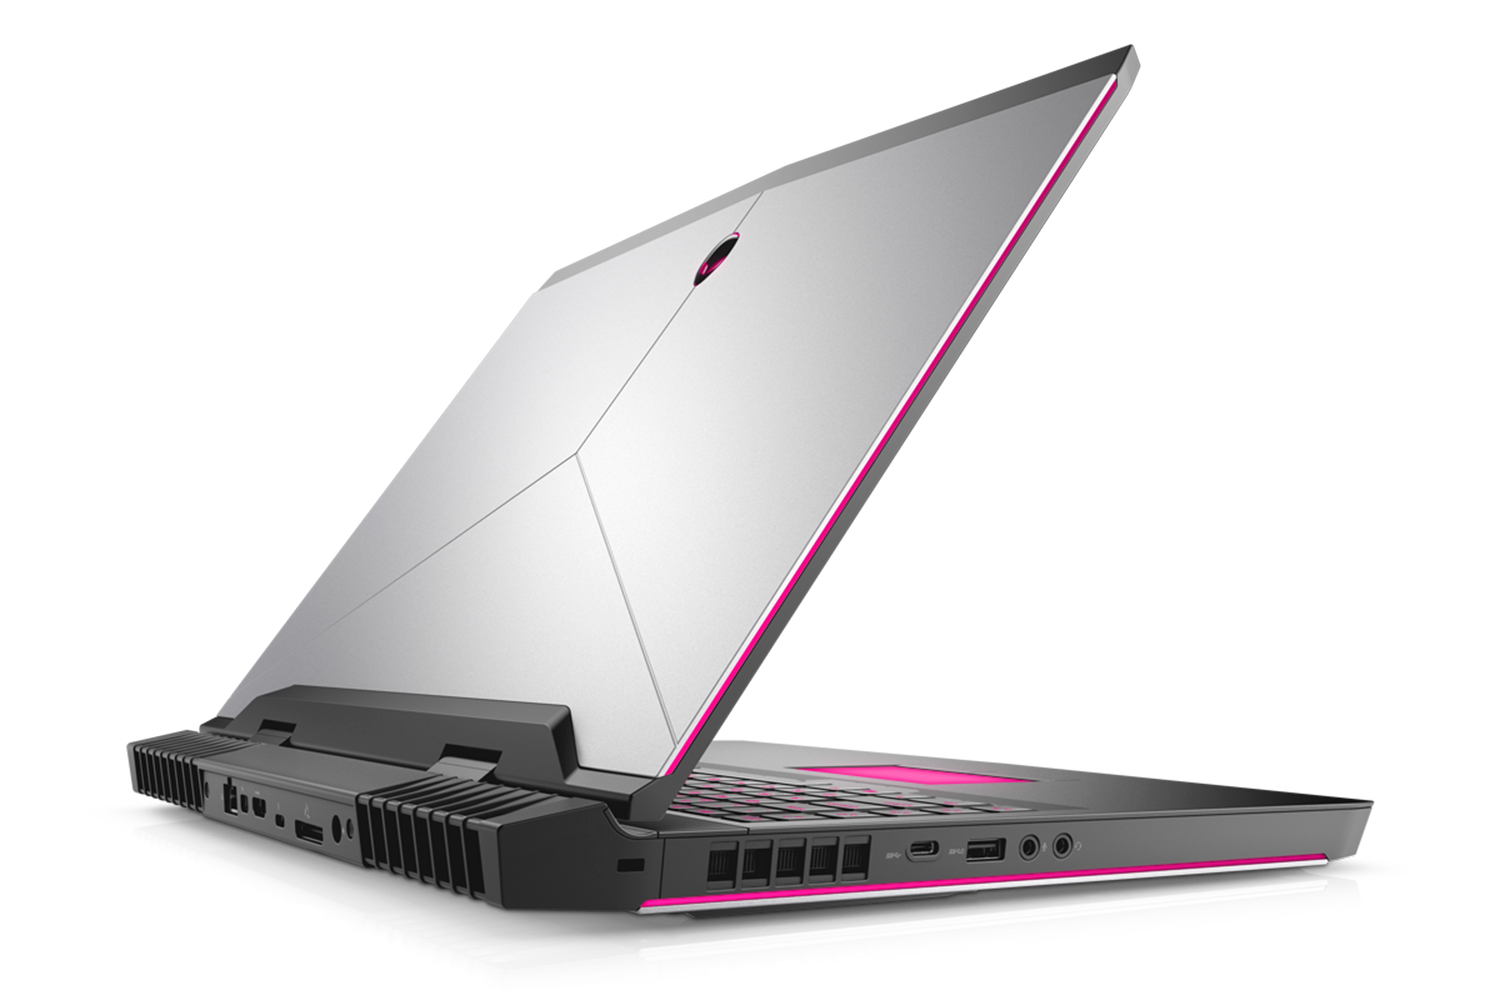 dell alienware inspiron 7000 gaming laptops refresh intel seventh gen cpu aw 17 07